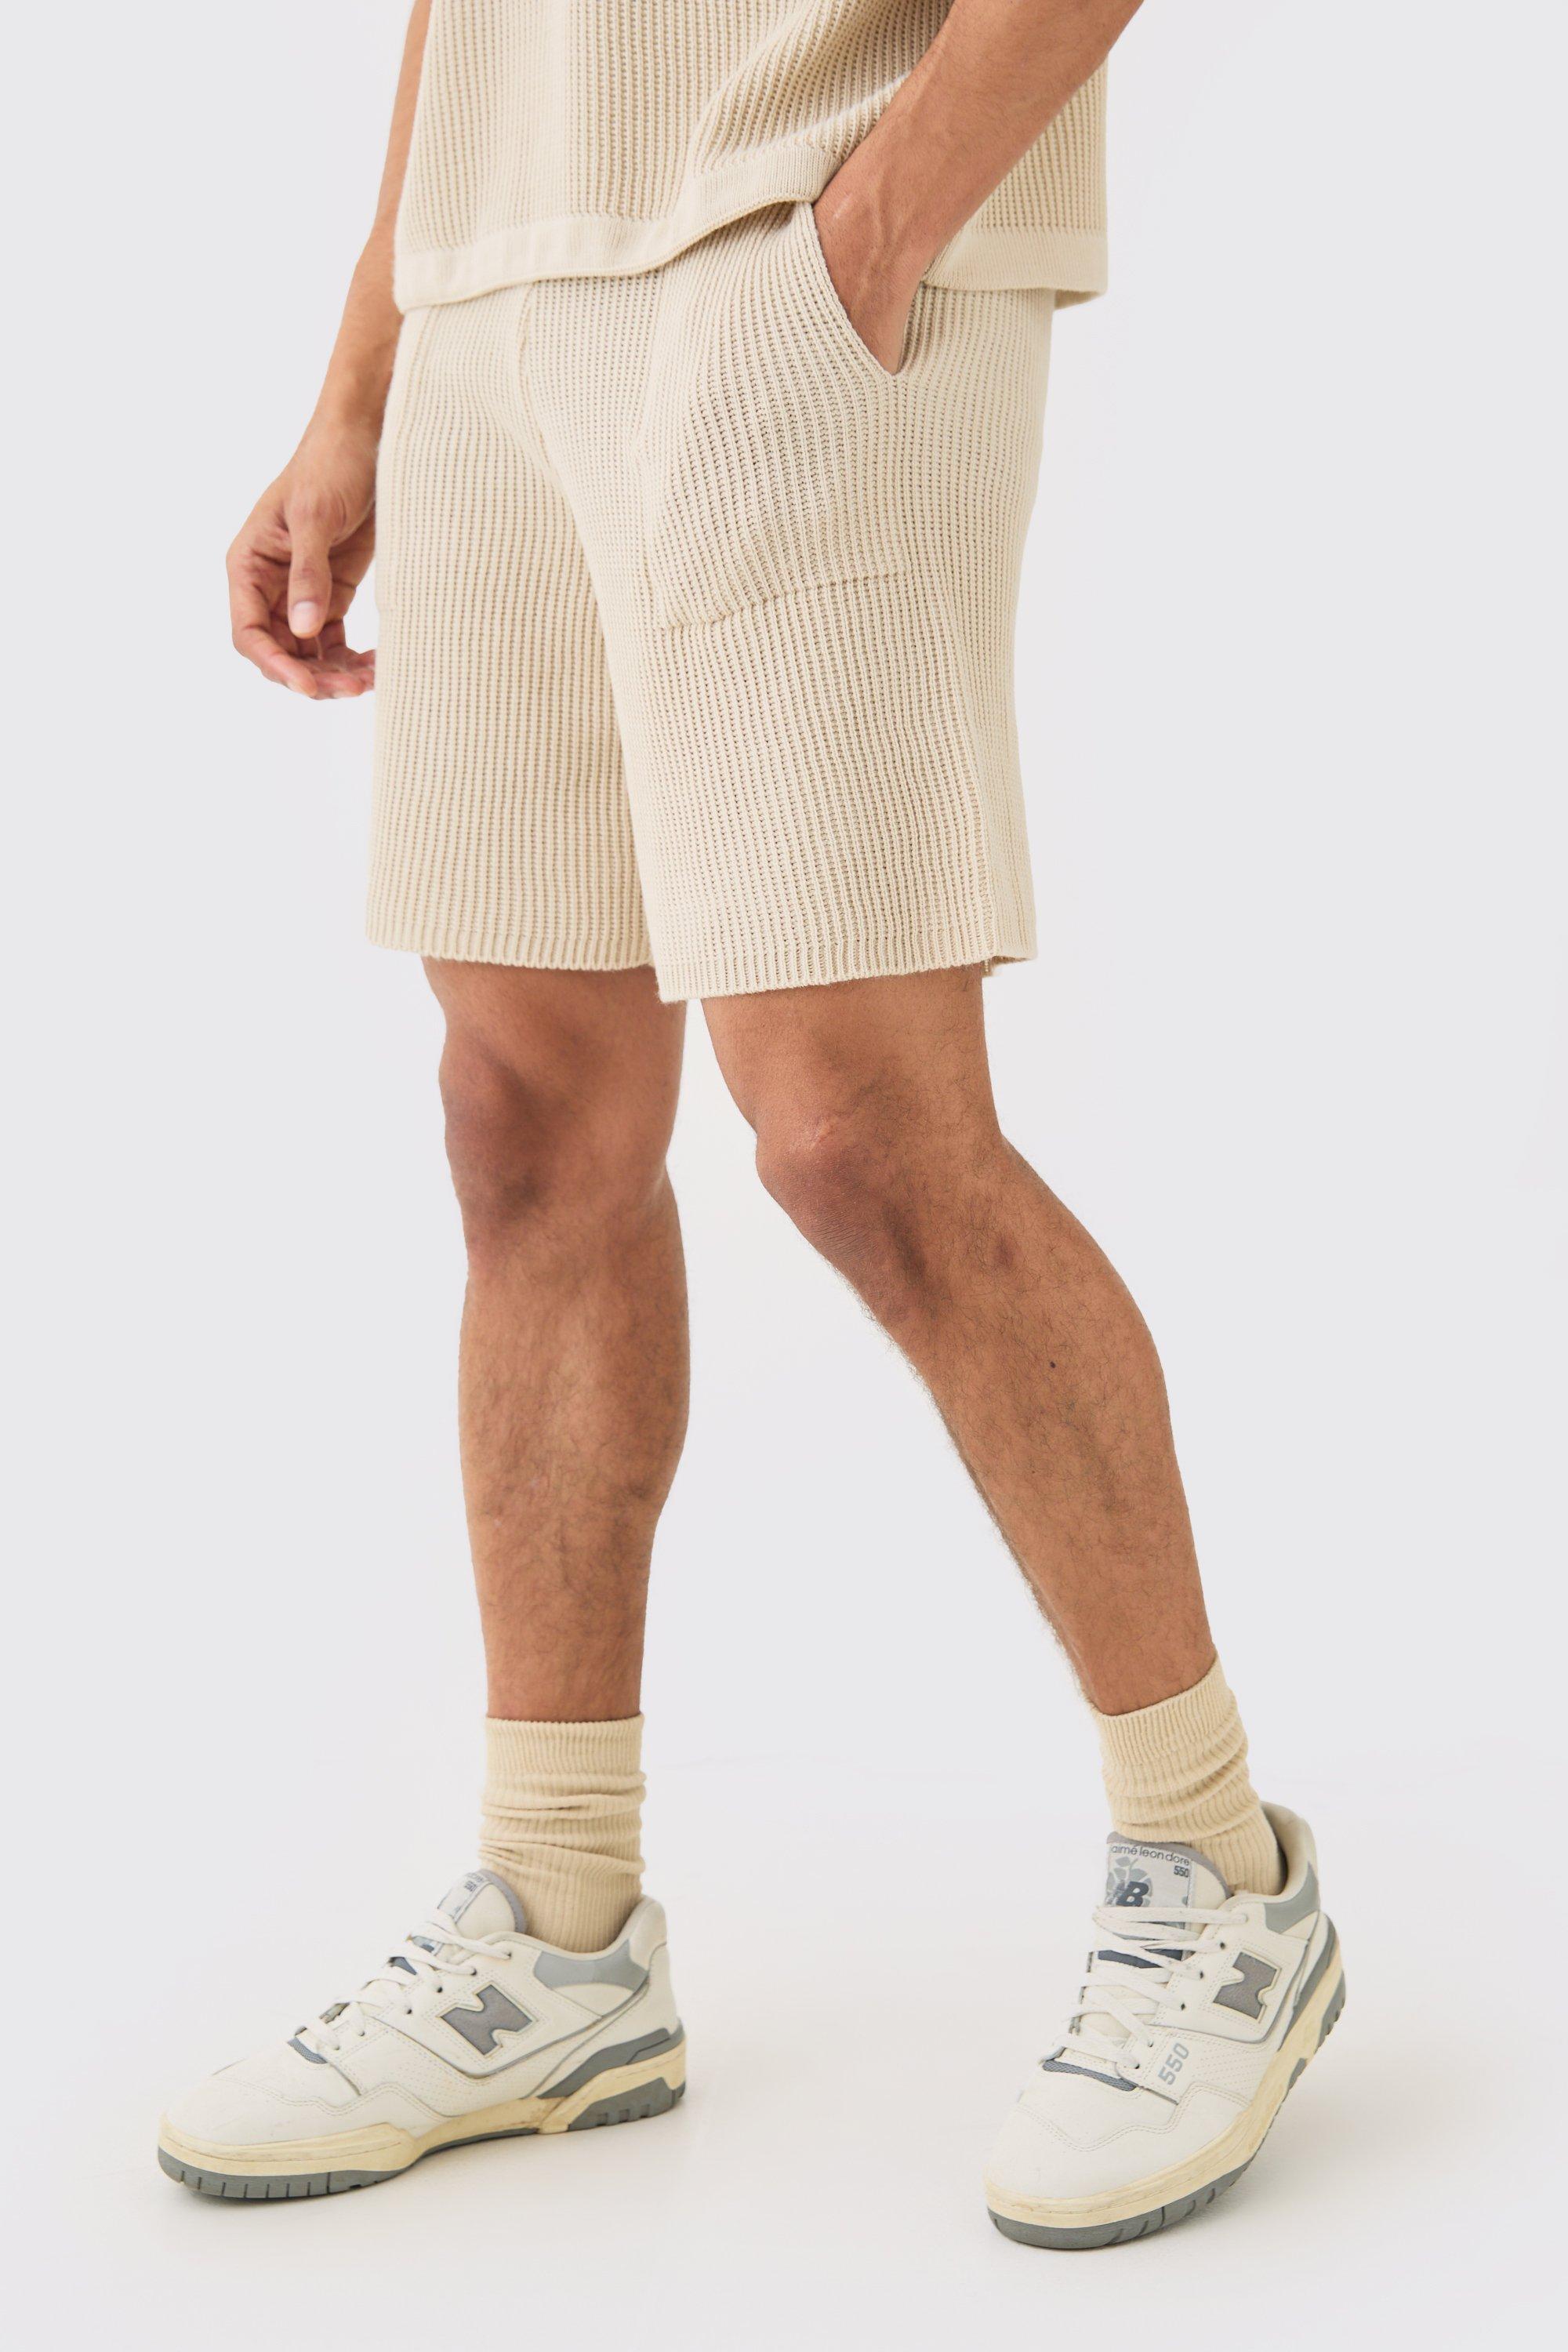 Image of Relaxed Mid Length Ribbed Knit Short, Beige